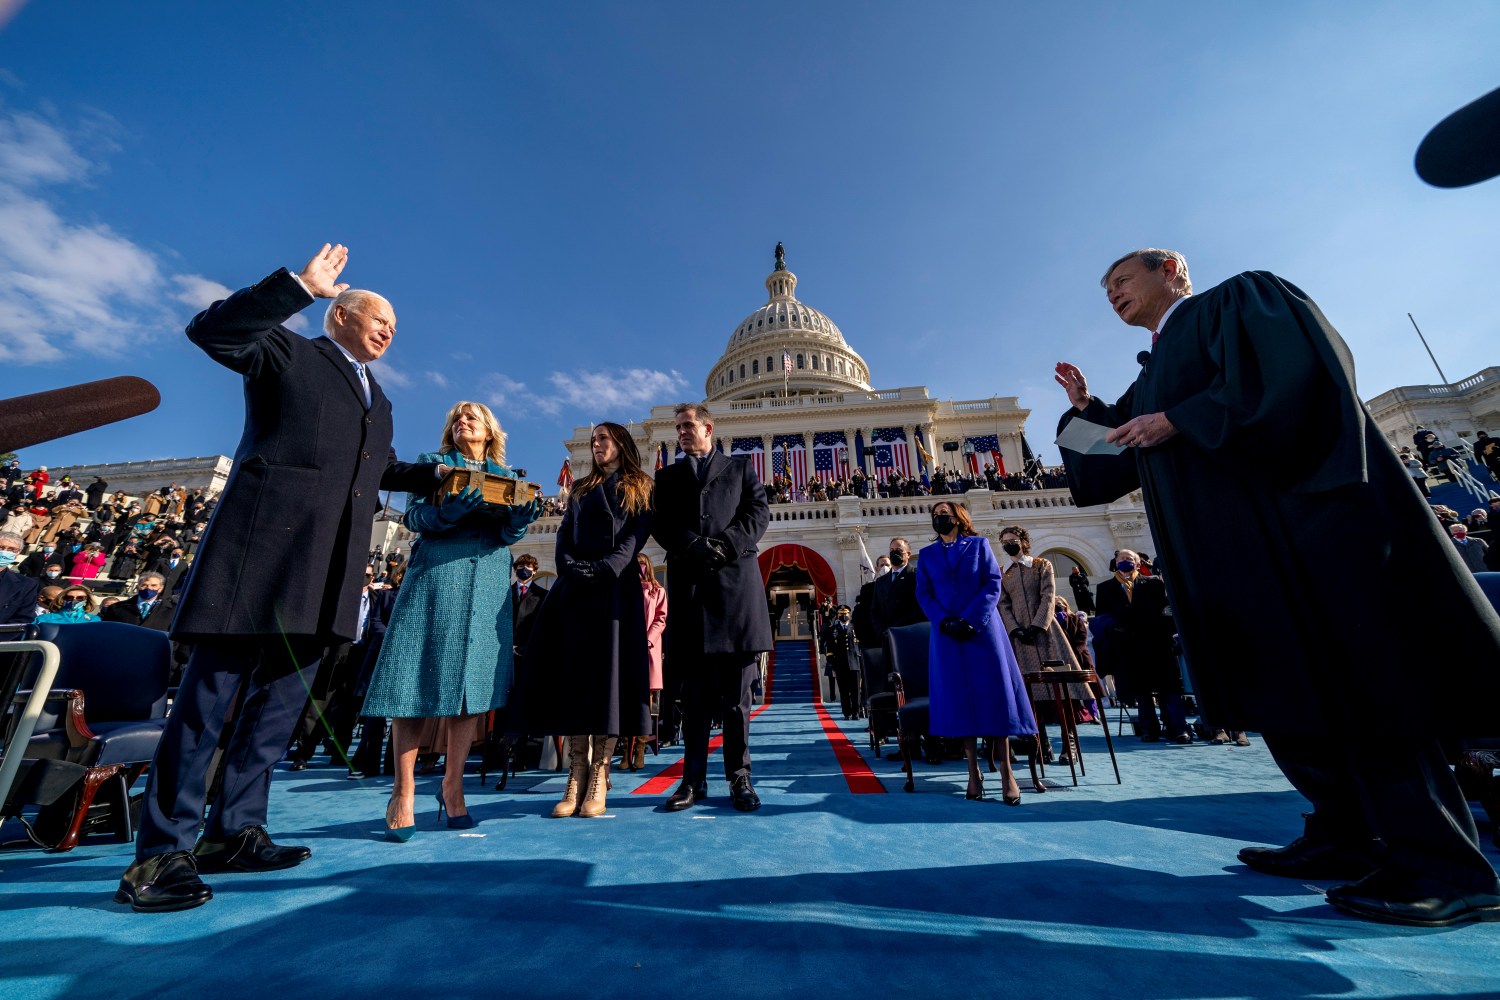 FILE PHOTO: Joe Biden is sworn in as the 46th president of the United States by Chief Justice John Roberts as Jill Biden holds the Bible during the 59th Presidential Inauguration at the U.S. Capitol, in Washington, U.S., January 20, 2021. Andrew Harnik/Pool via REUTERS/File Photo